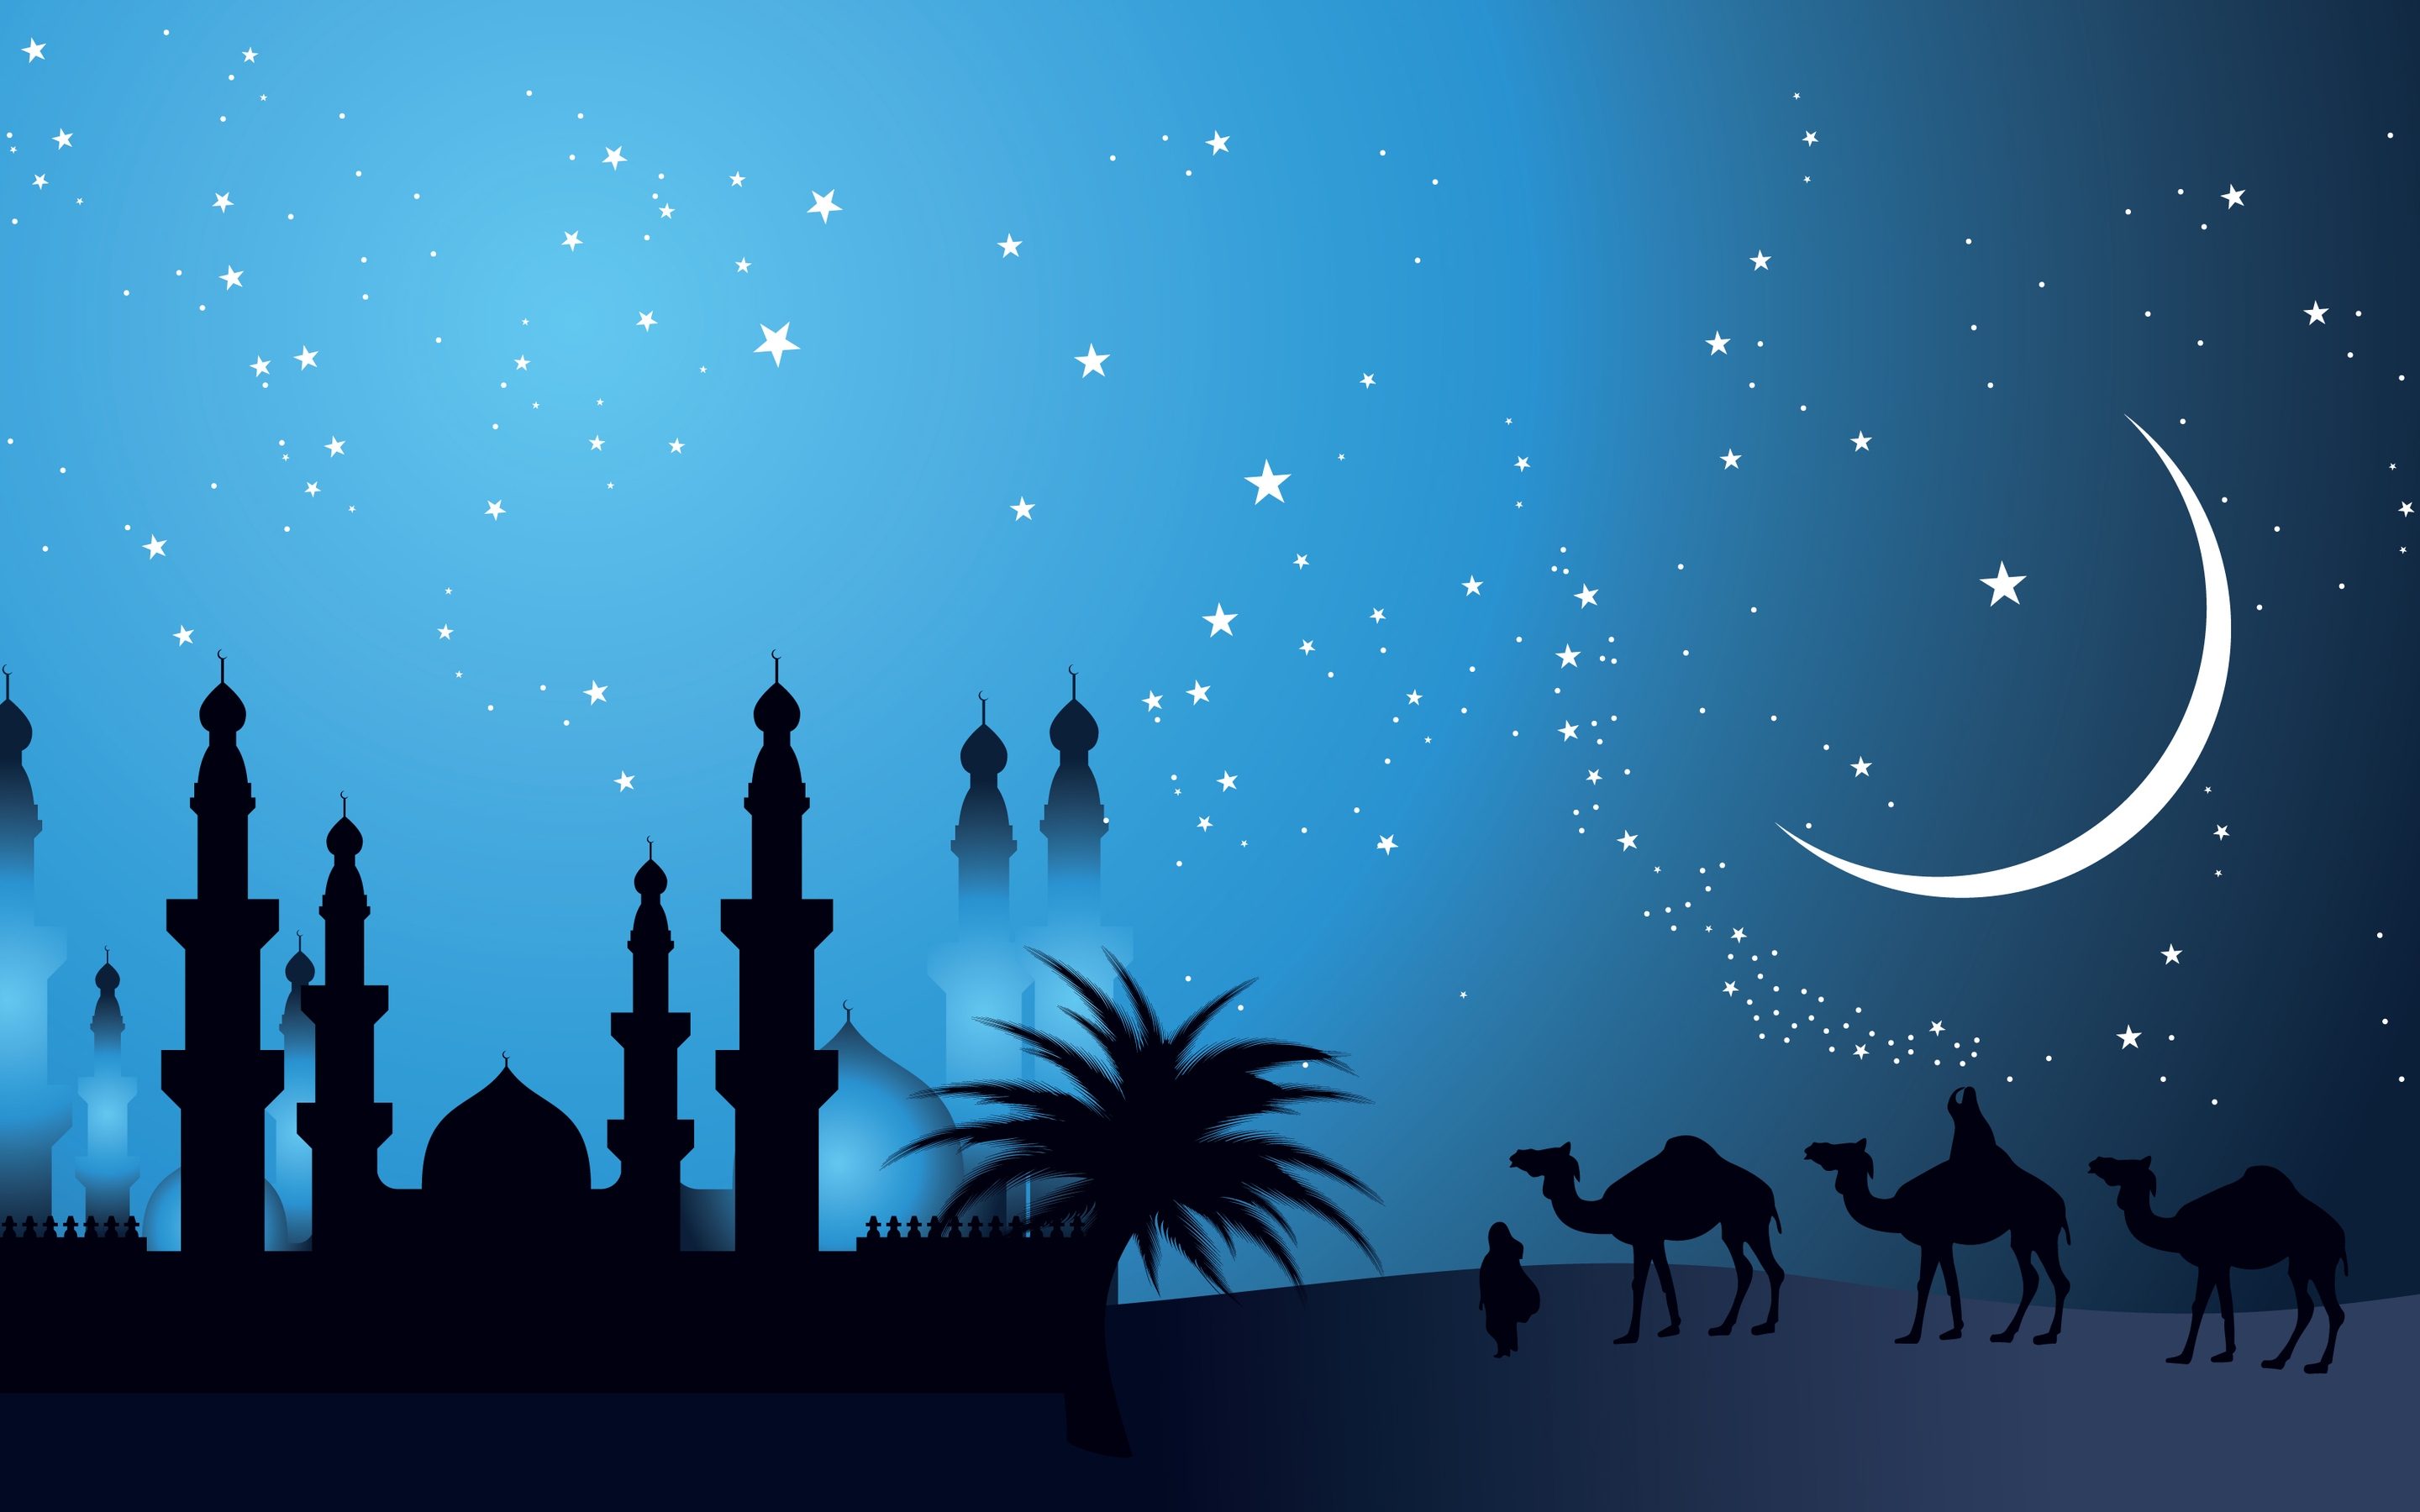 Camels in The Night for 2880 x 1800 Retina Display resolution